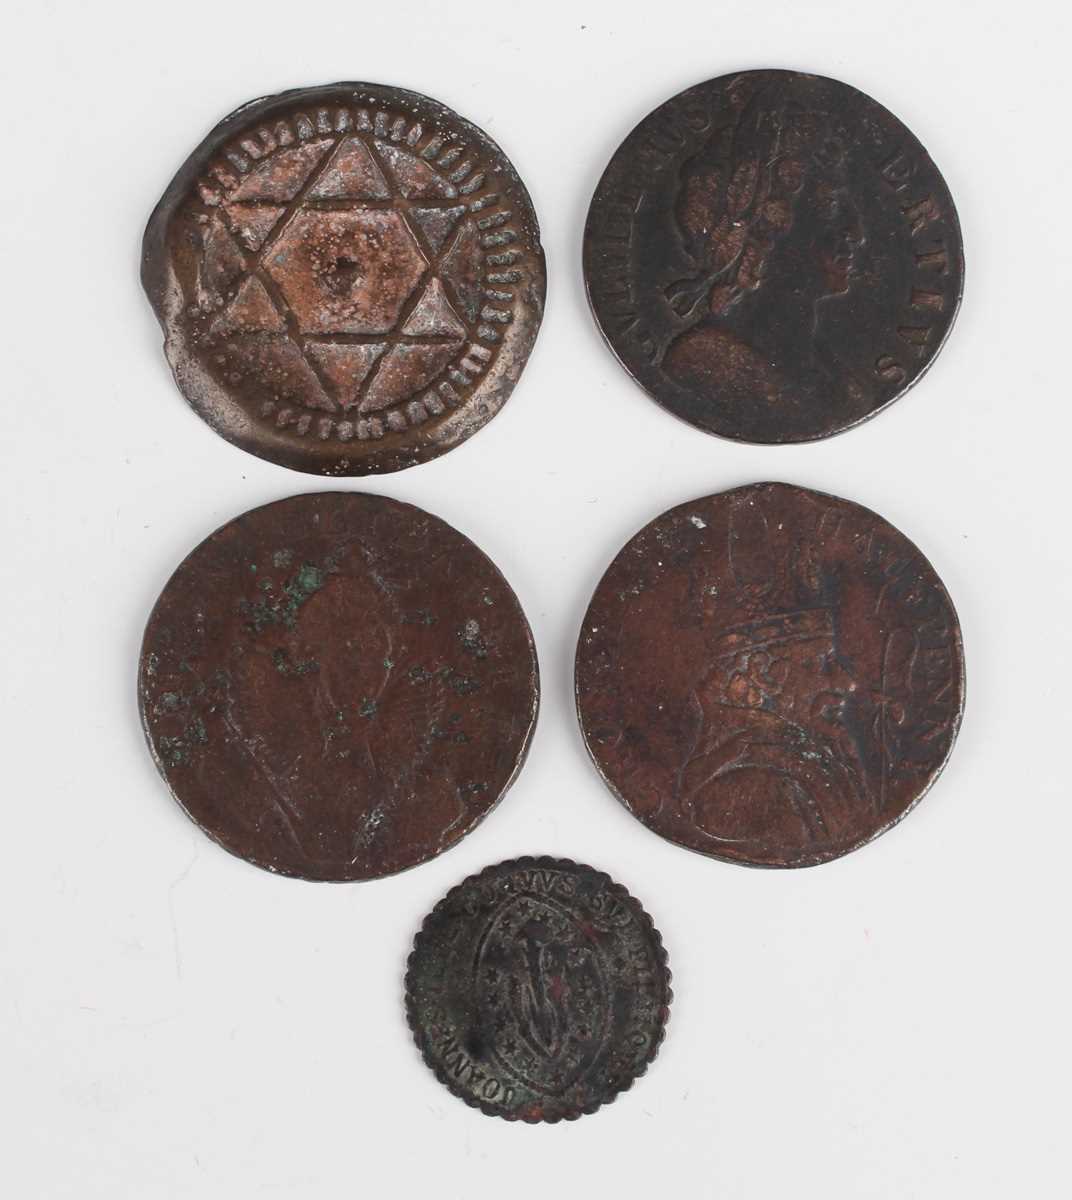 A small collection of coins and banknotes, including two George III crowns, 1819 and 1820, a - Image 4 of 6